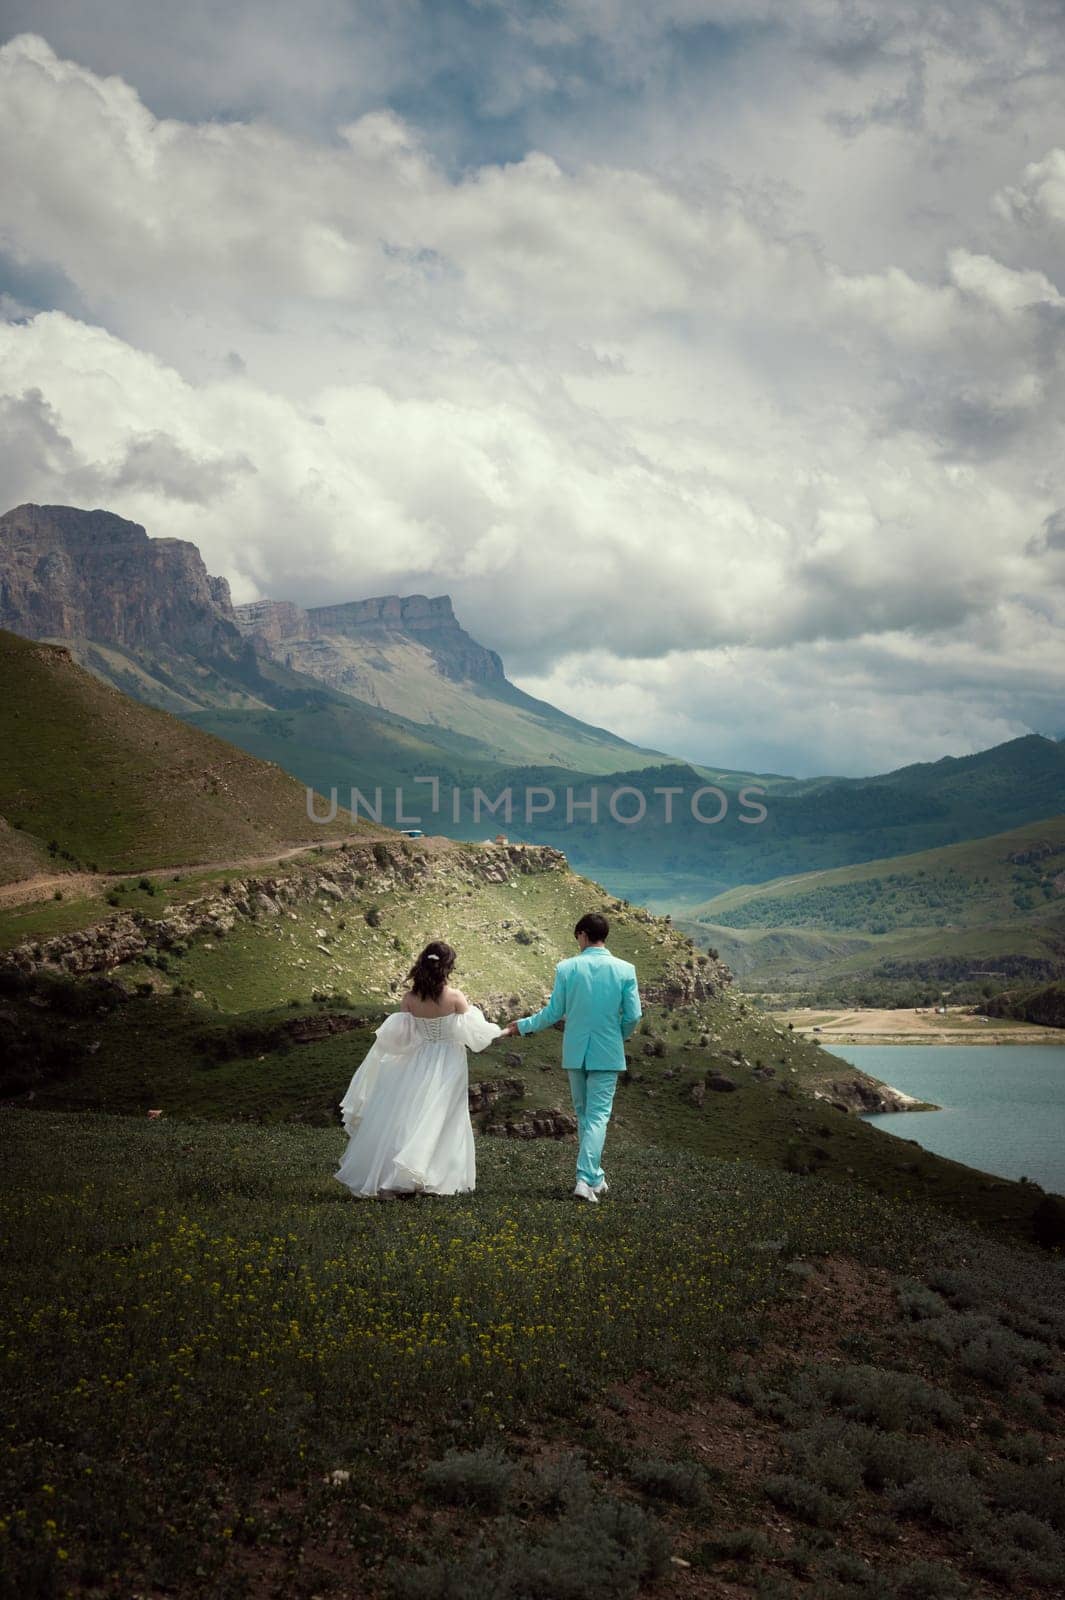 A wedding couple walks on green grass against the backdrop of mountains and high peaks. bride and groom stand with their backs turned and pose for wedding photos in the wilderness of the mountains by yanik88